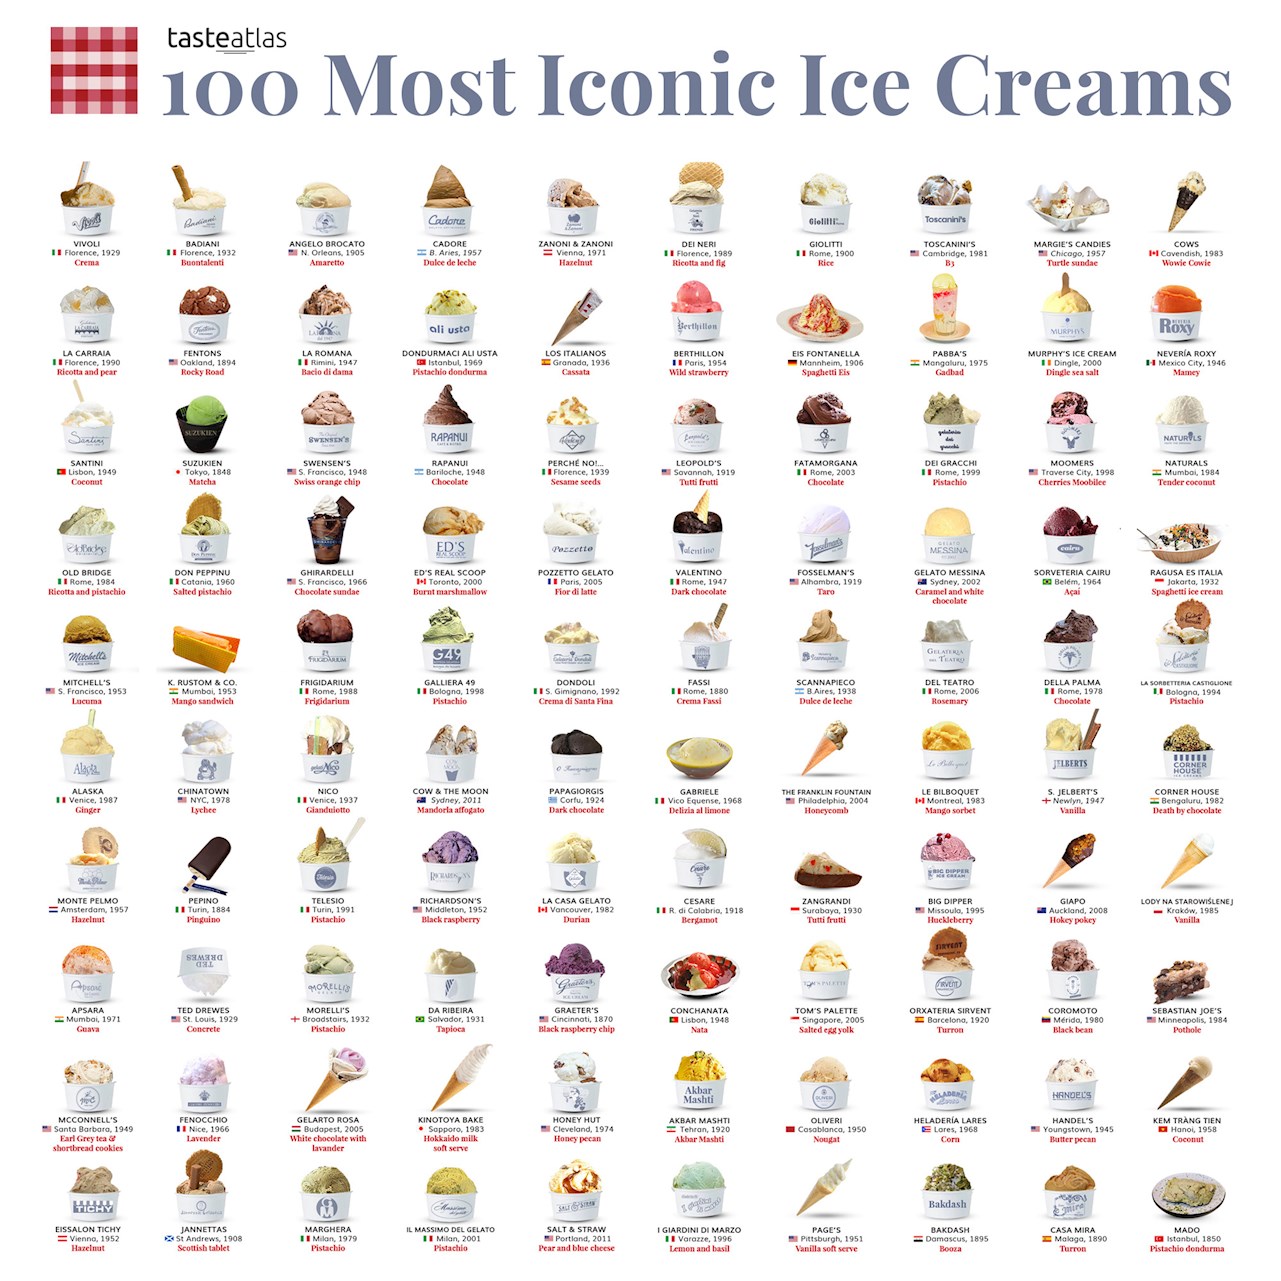 Discover the 100 Most Iconic Ice Creams* of the World